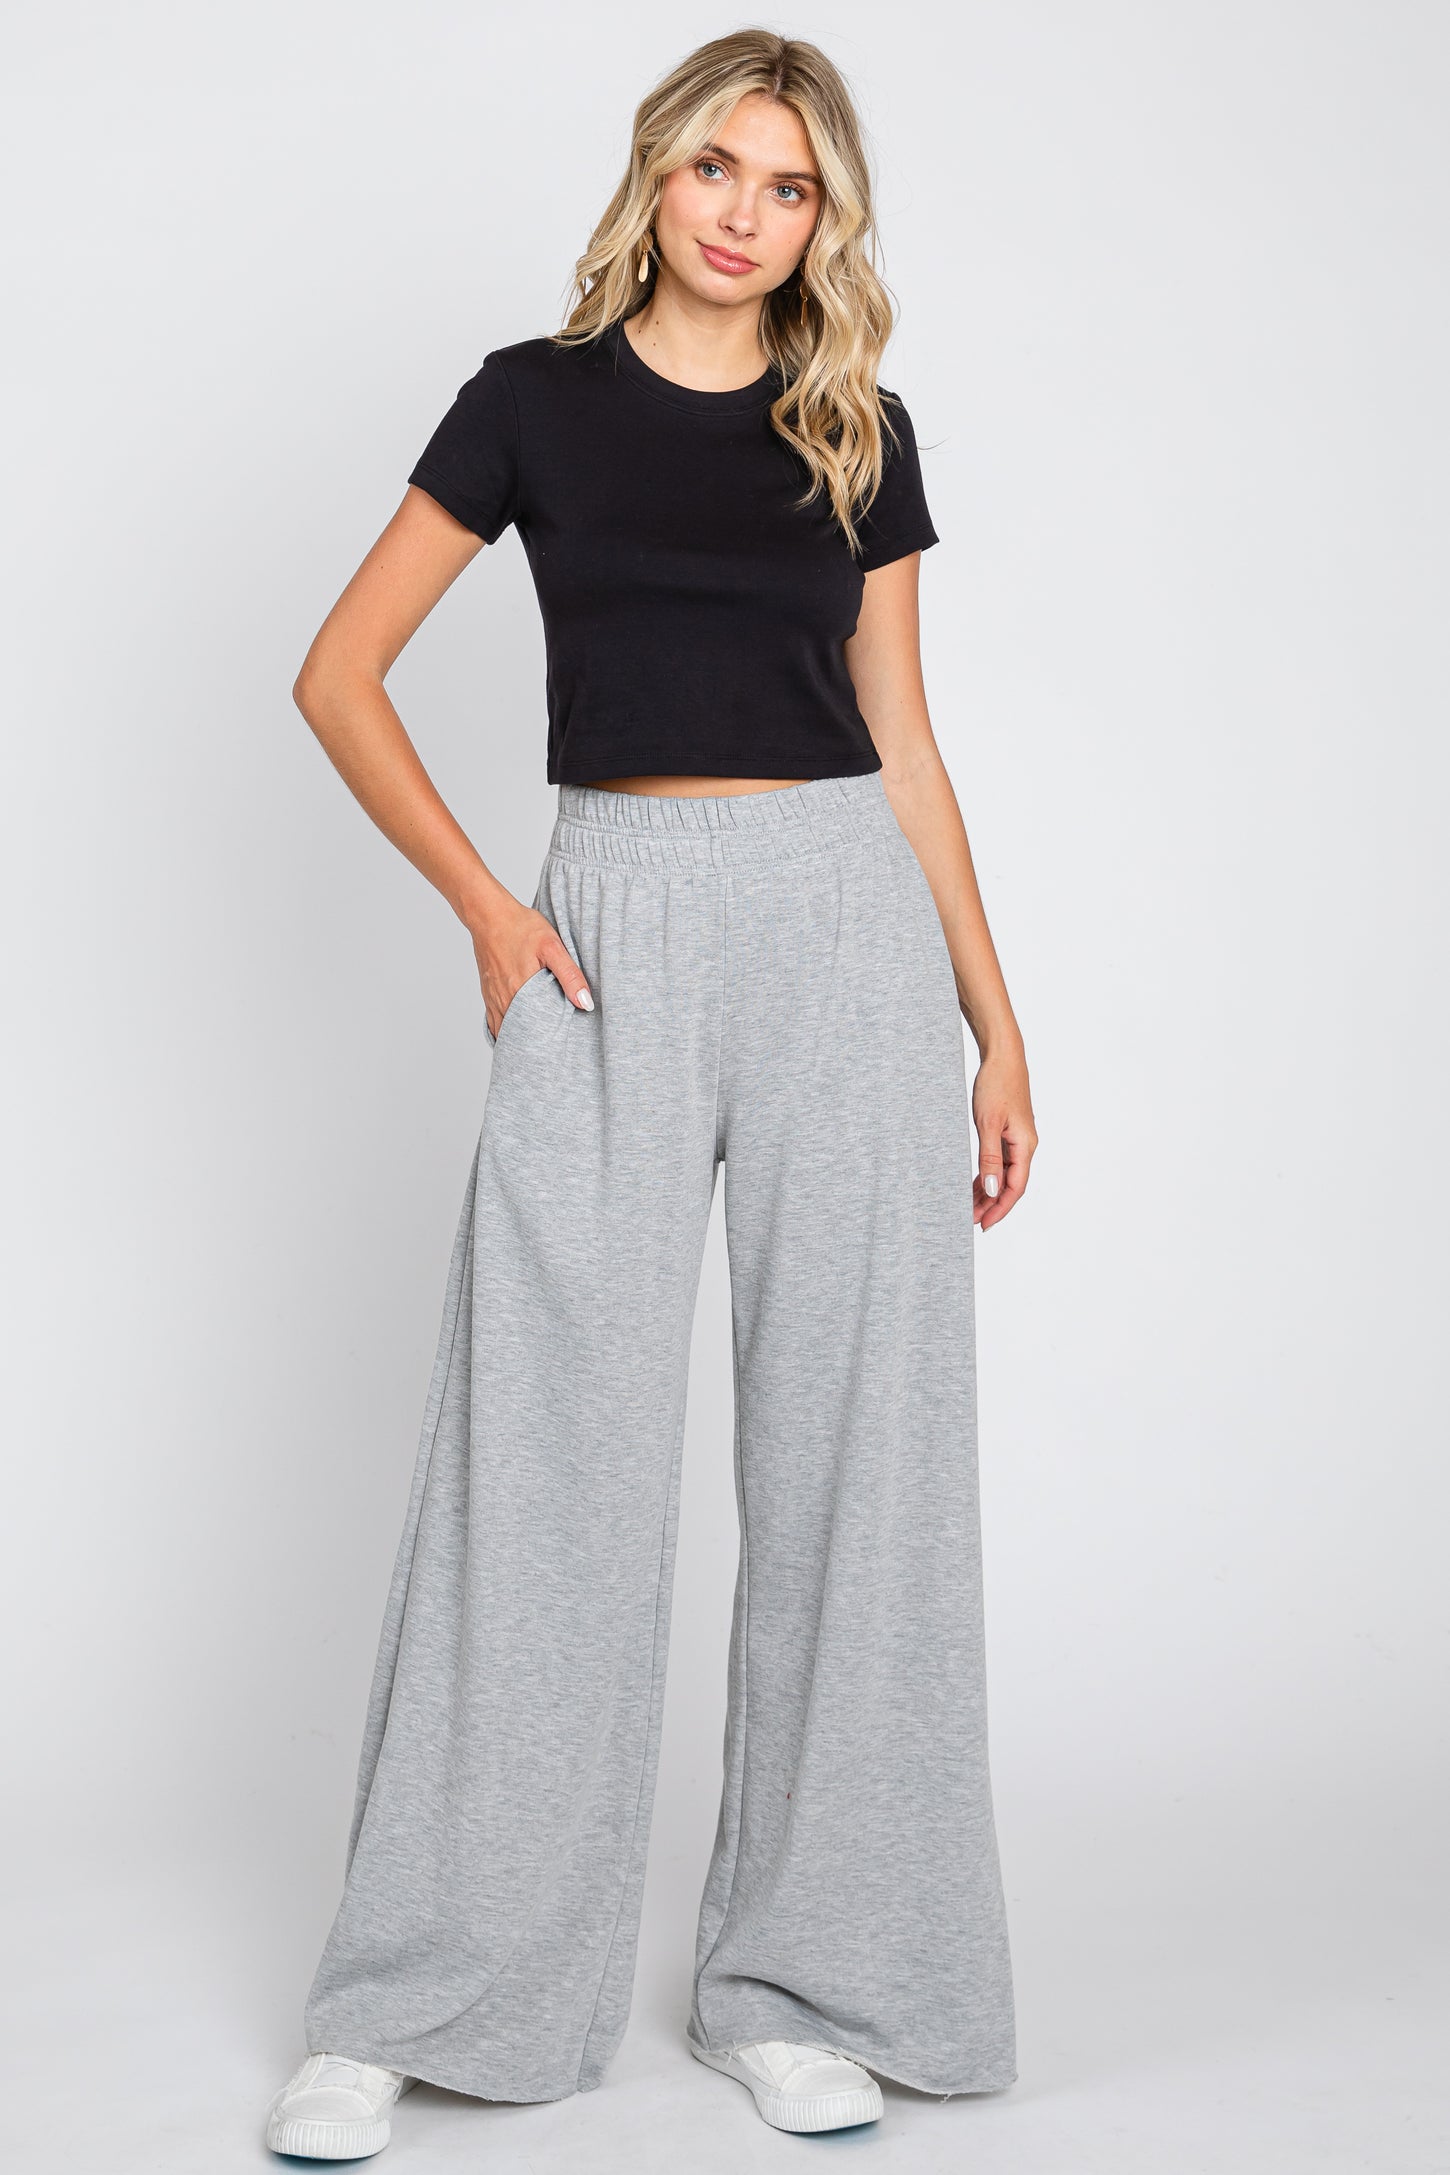 Amazon's Best-Selling Lounge Pants Are on Sale for $29 Right Now